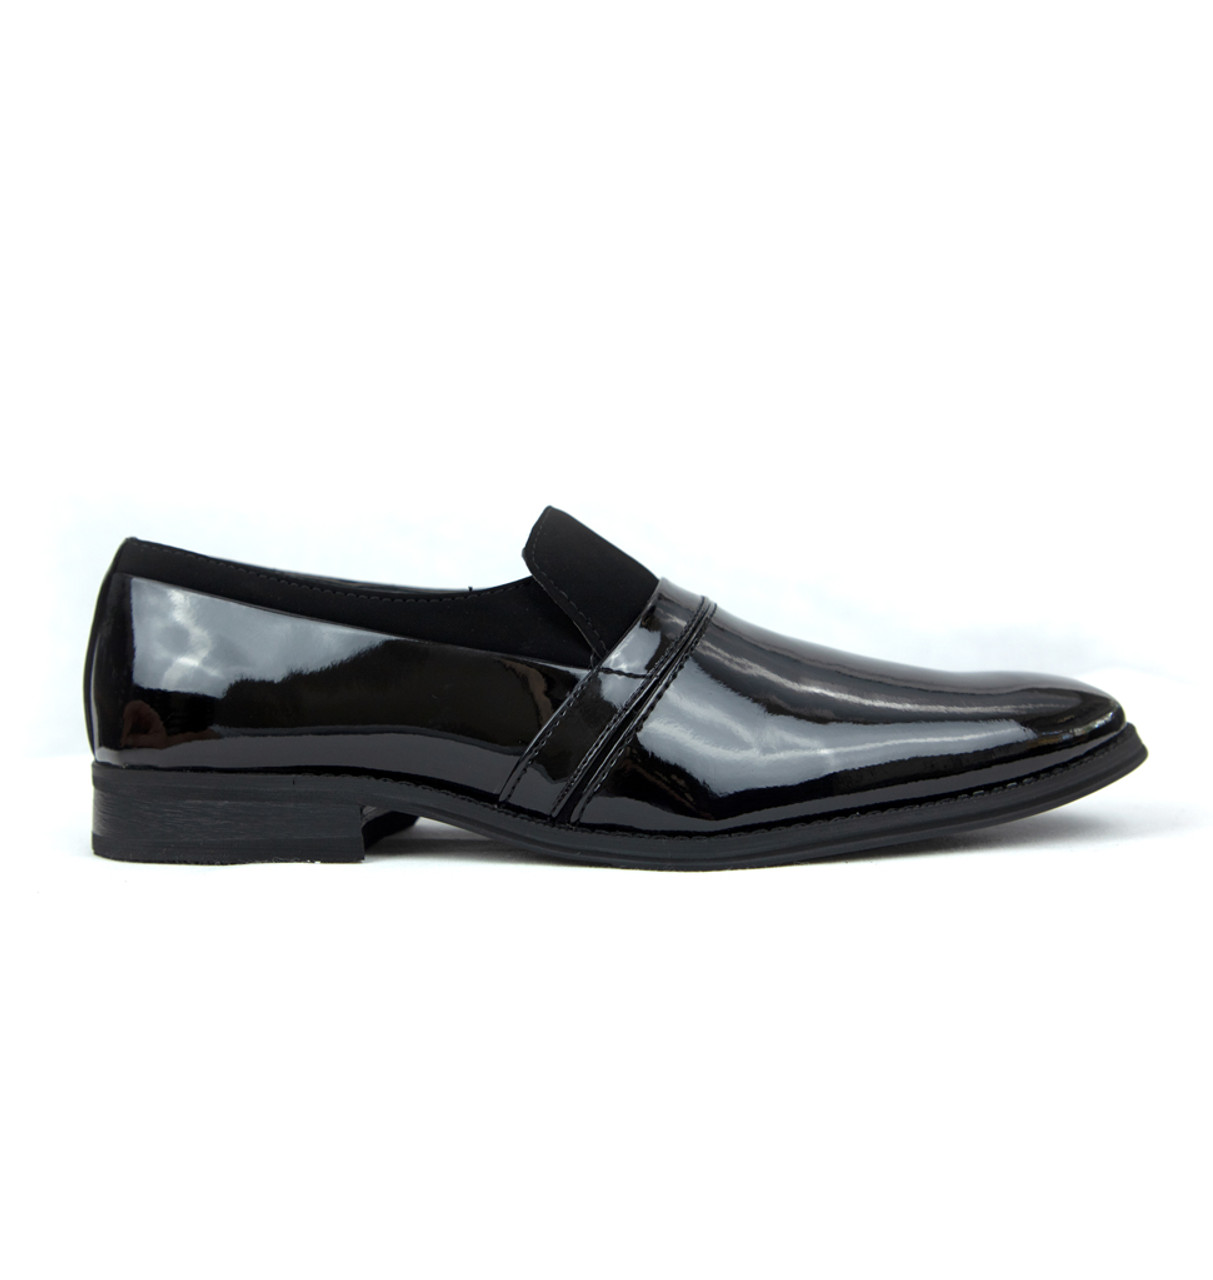 Men's Black Tuxedo Shoes Patent Leather Traditional Round 